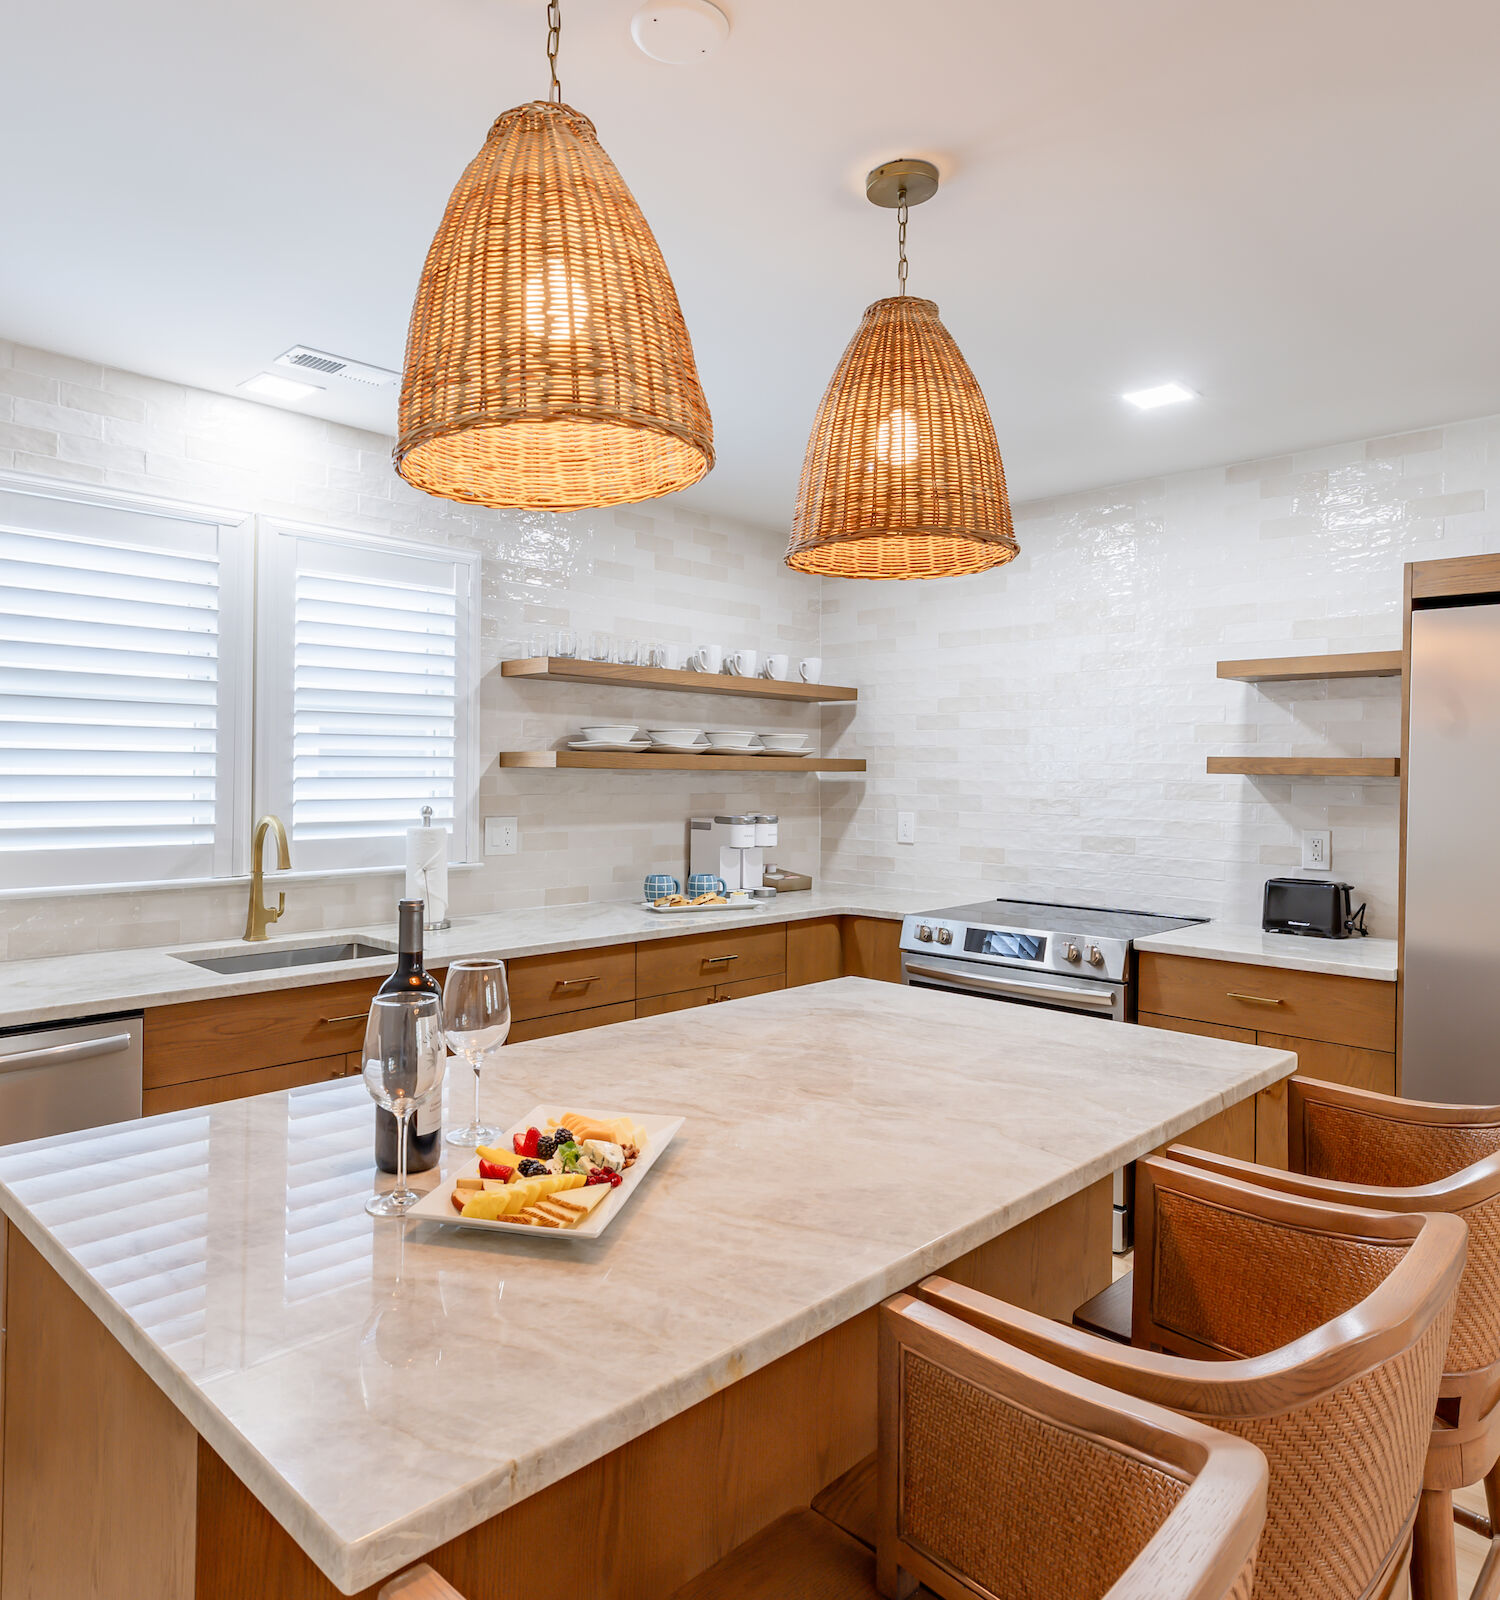 A modern kitchen with wooden cabinets, a marble island with wicker chairs, stainless steel appliances, and pendant lighting.